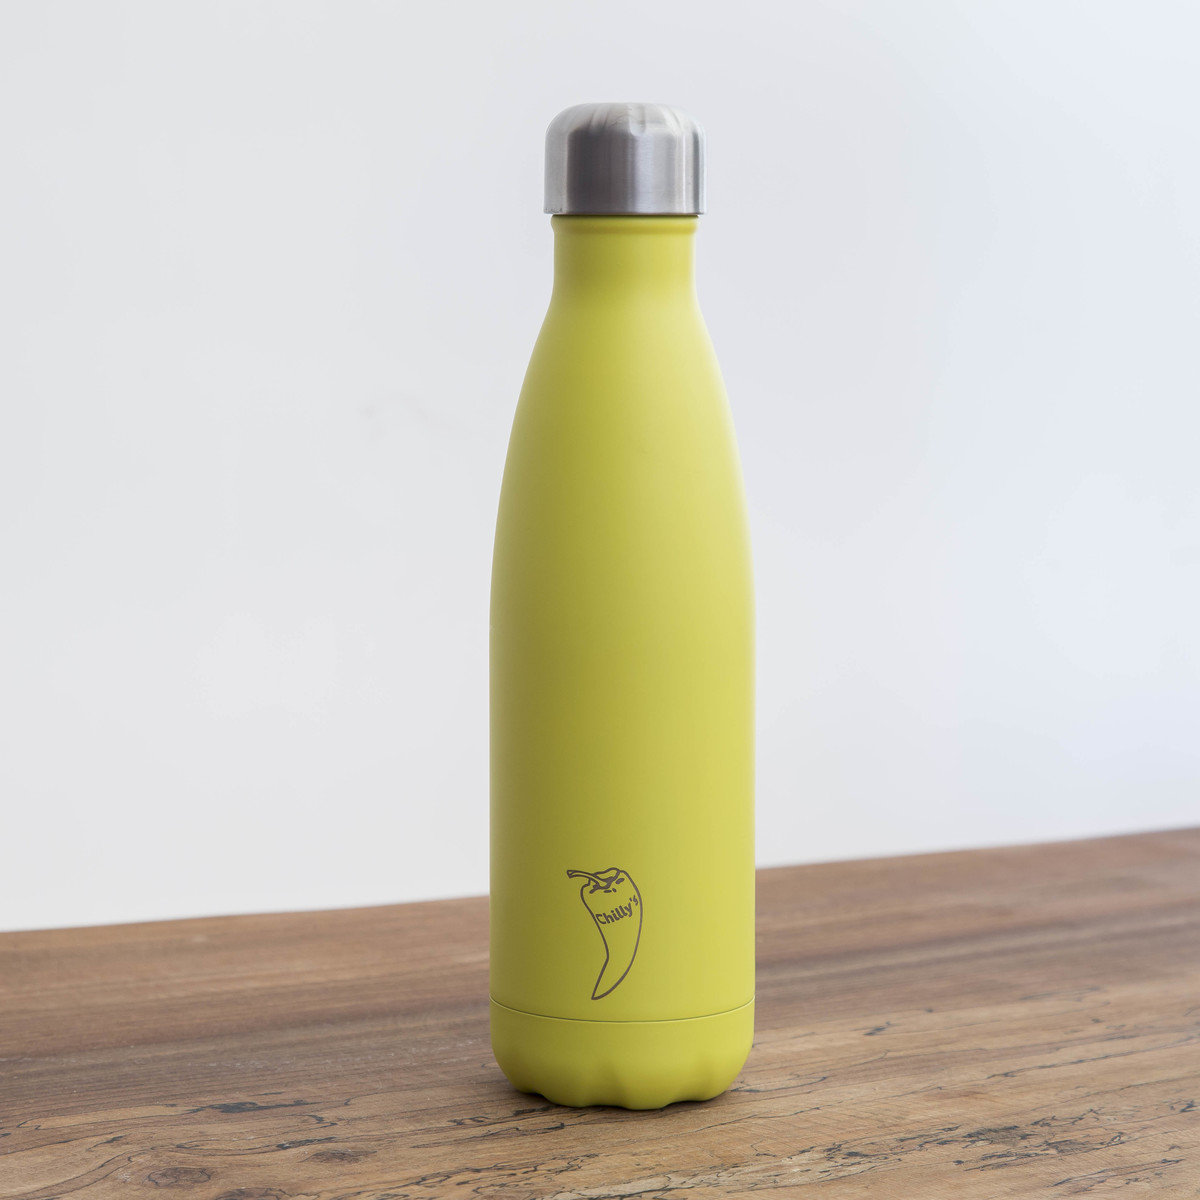 https://www.ccwclothing.com/uploads/images/products/verylarge/ccw-clothing-bottle-500ml-neon-ylw-1553258143Neon-Yellow-500ml.jpg